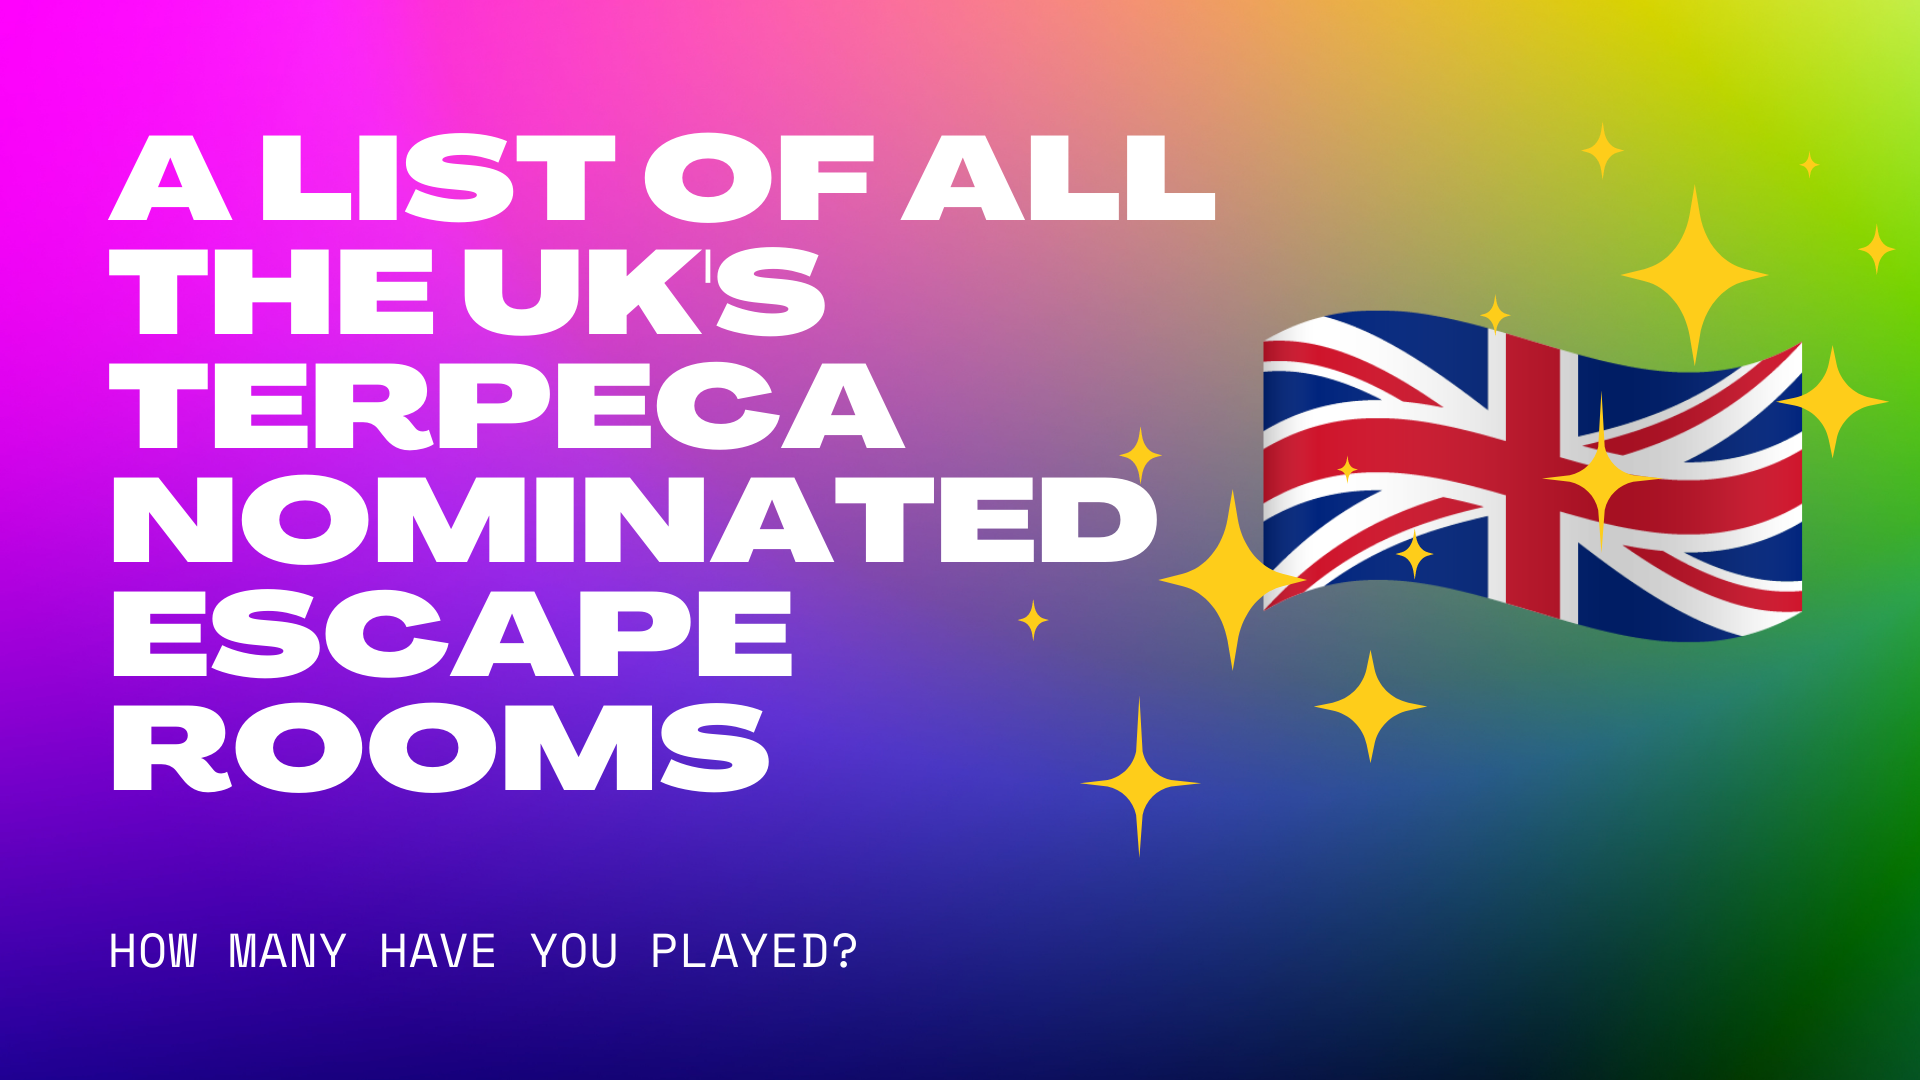 A List of all the uk's terpeca nominated escape rooms